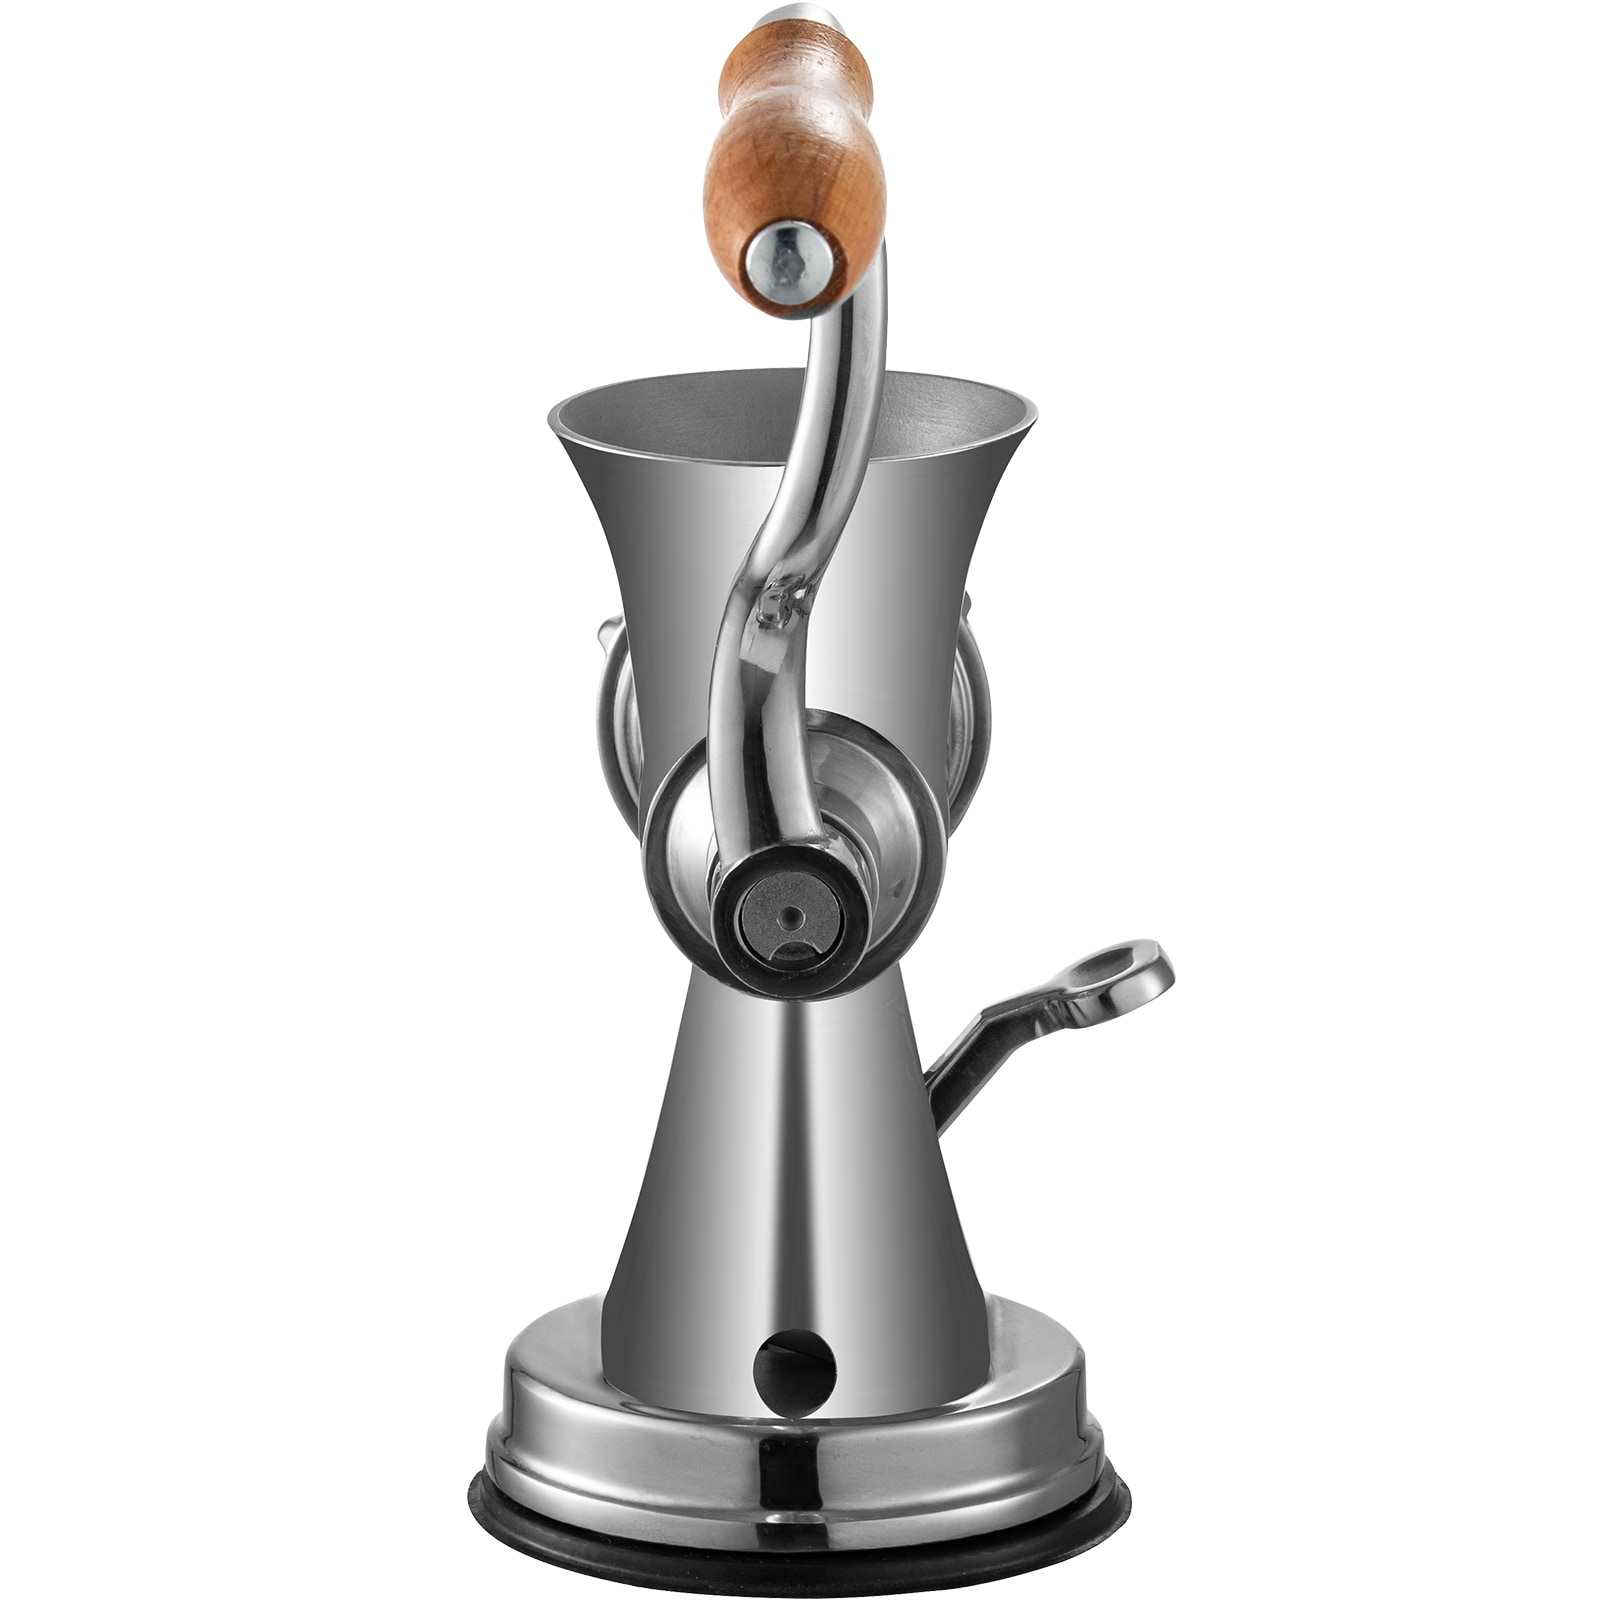 https://ak1.ostkcdn.com/images/products/is/images/direct/f411c2edce447d923dac180f0eca2978a9a001da/VEVOR-Meat-Grinder-Manual-304-Stainless-Steel-Hand-Operated-Meat-Grinder-Multifunctional-Crank-Sausage-Maker-Coffee-Powder.jpg